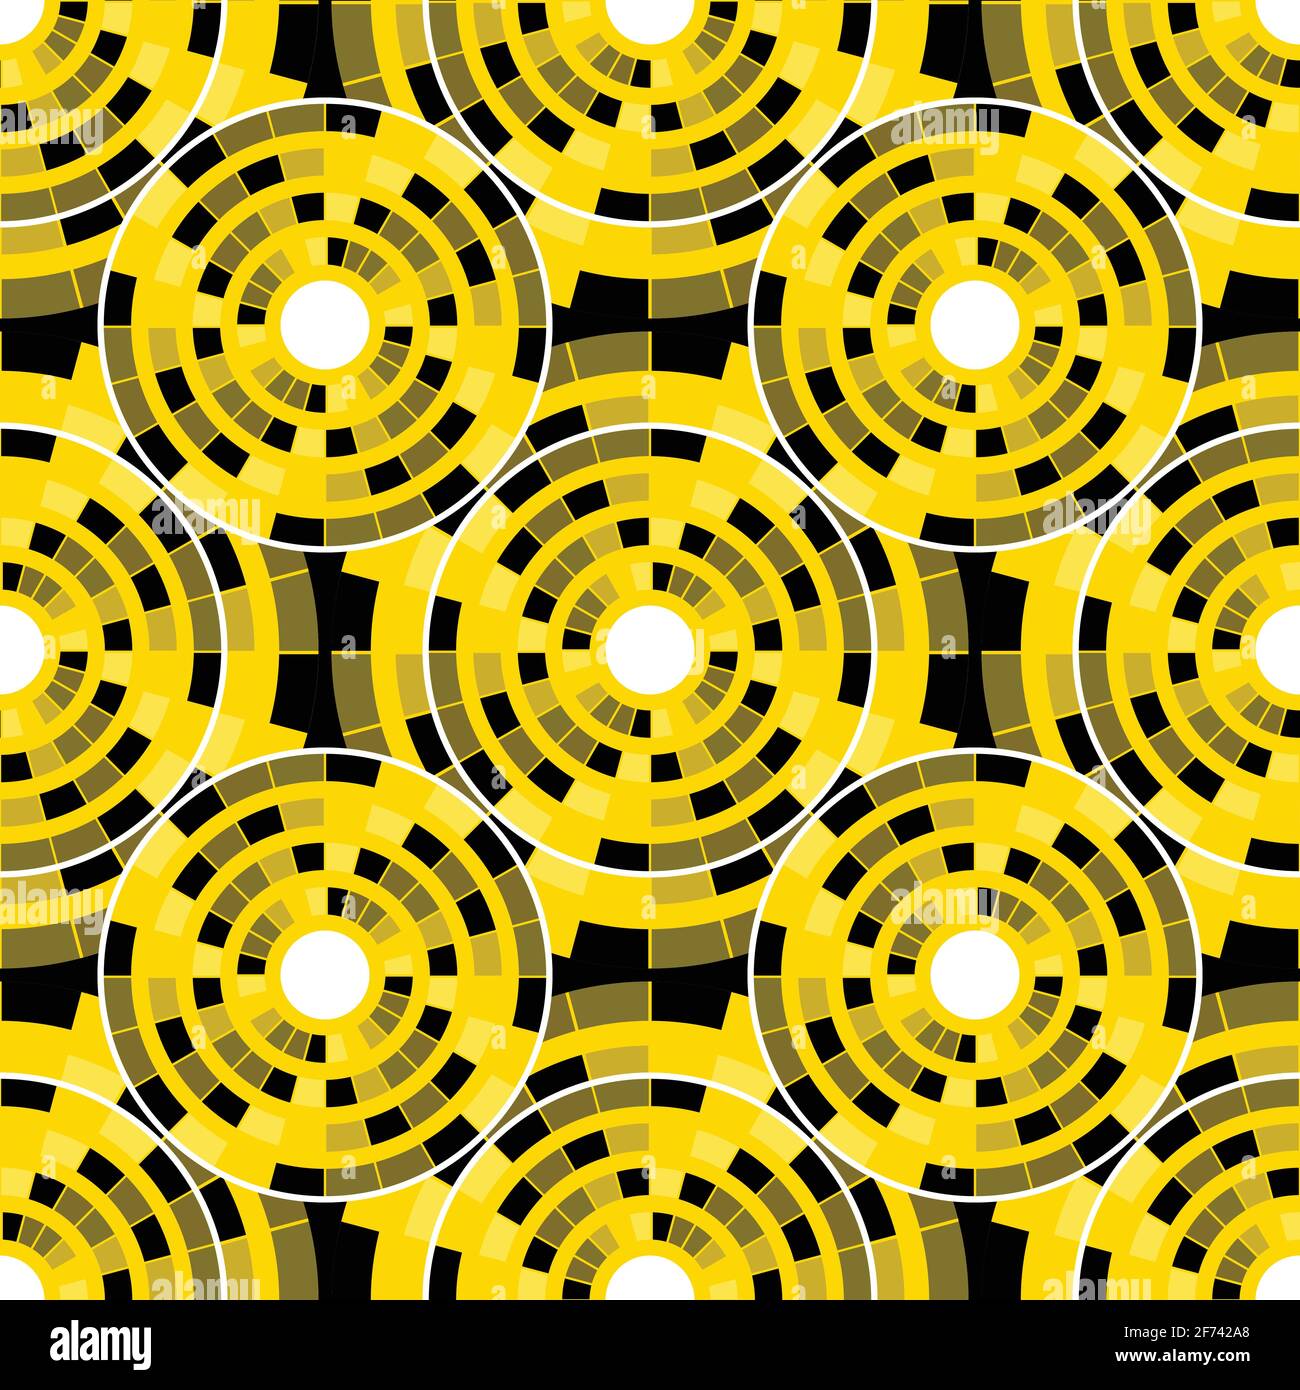 Seamless black, yellow and white pattern in the form of abstract circles. vector Stock Vector